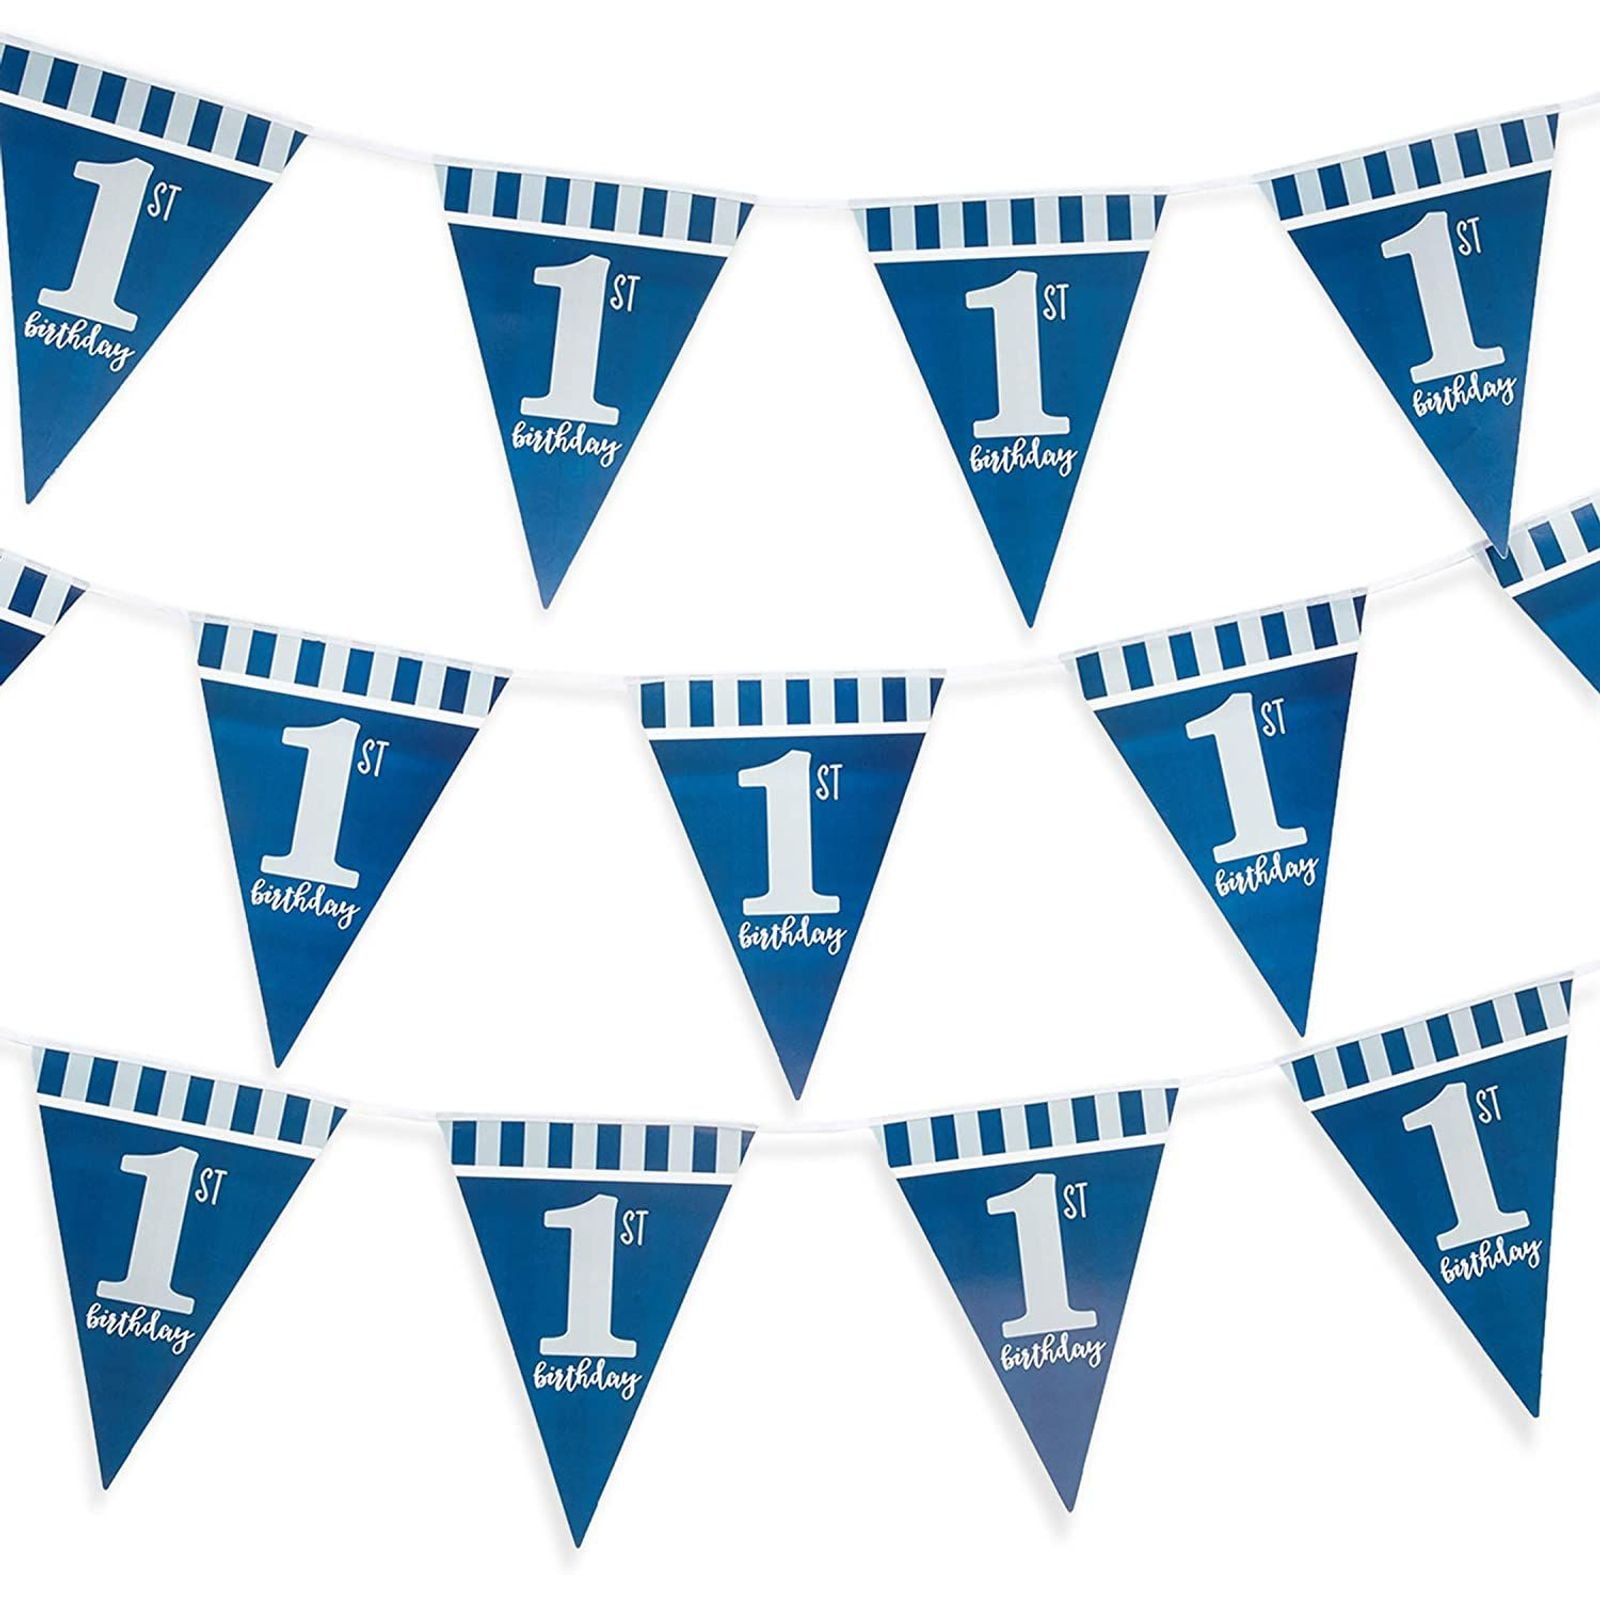 NYC New York City Birthday Bunting Garland Party Venue Decoration Party Flag Banner Garland 